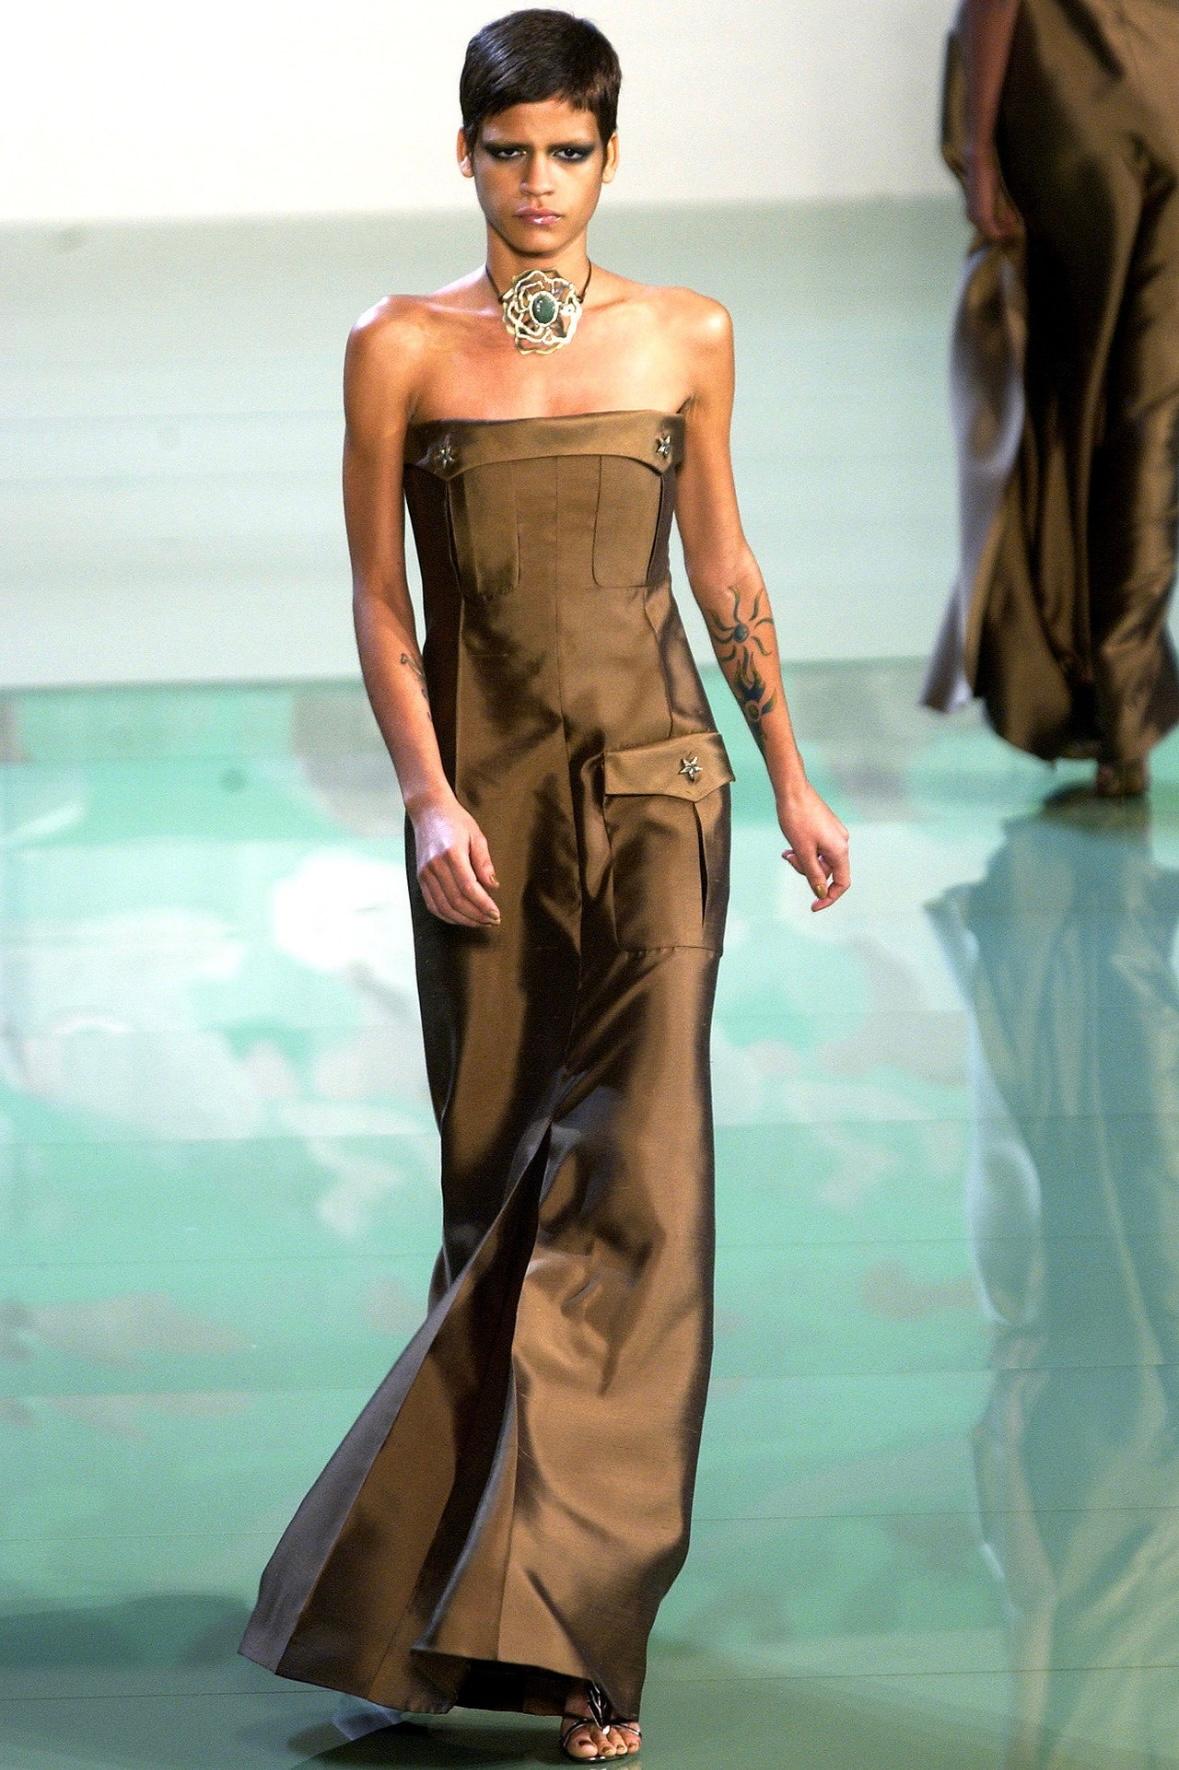 This fabulous green strapless Valentino gown was designed by Valentino Garavani for his Spring/Summer 2003 collection. Debuting as look 67 on Omahyra Mota, this gown perfectly captures the collection's military motif with functional cargo style